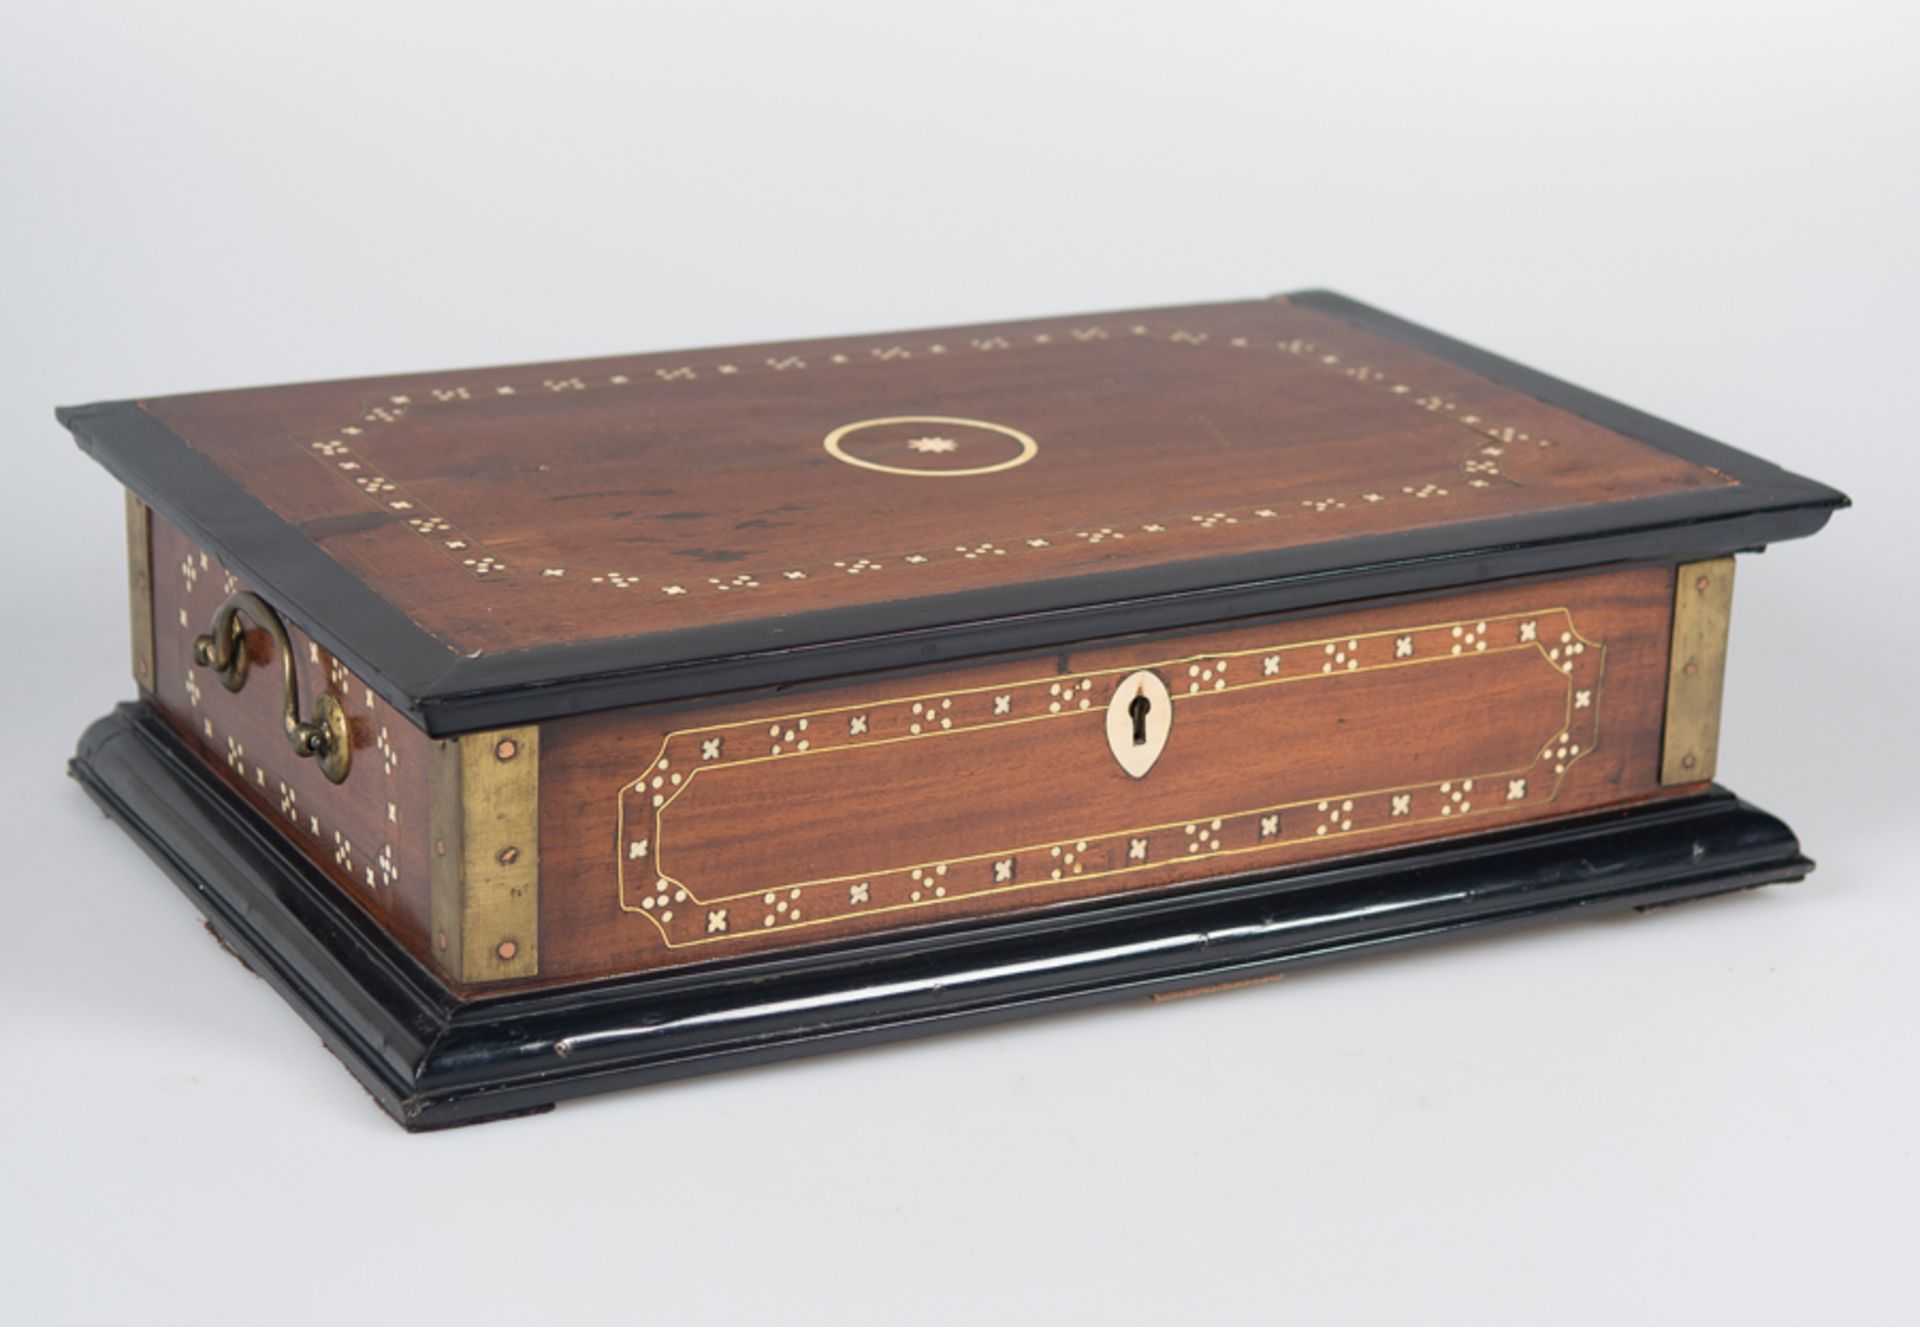 An Anglo-Indian brass-mounted padouk, ebony and bone box, Ceylon, second half of the 18th century.